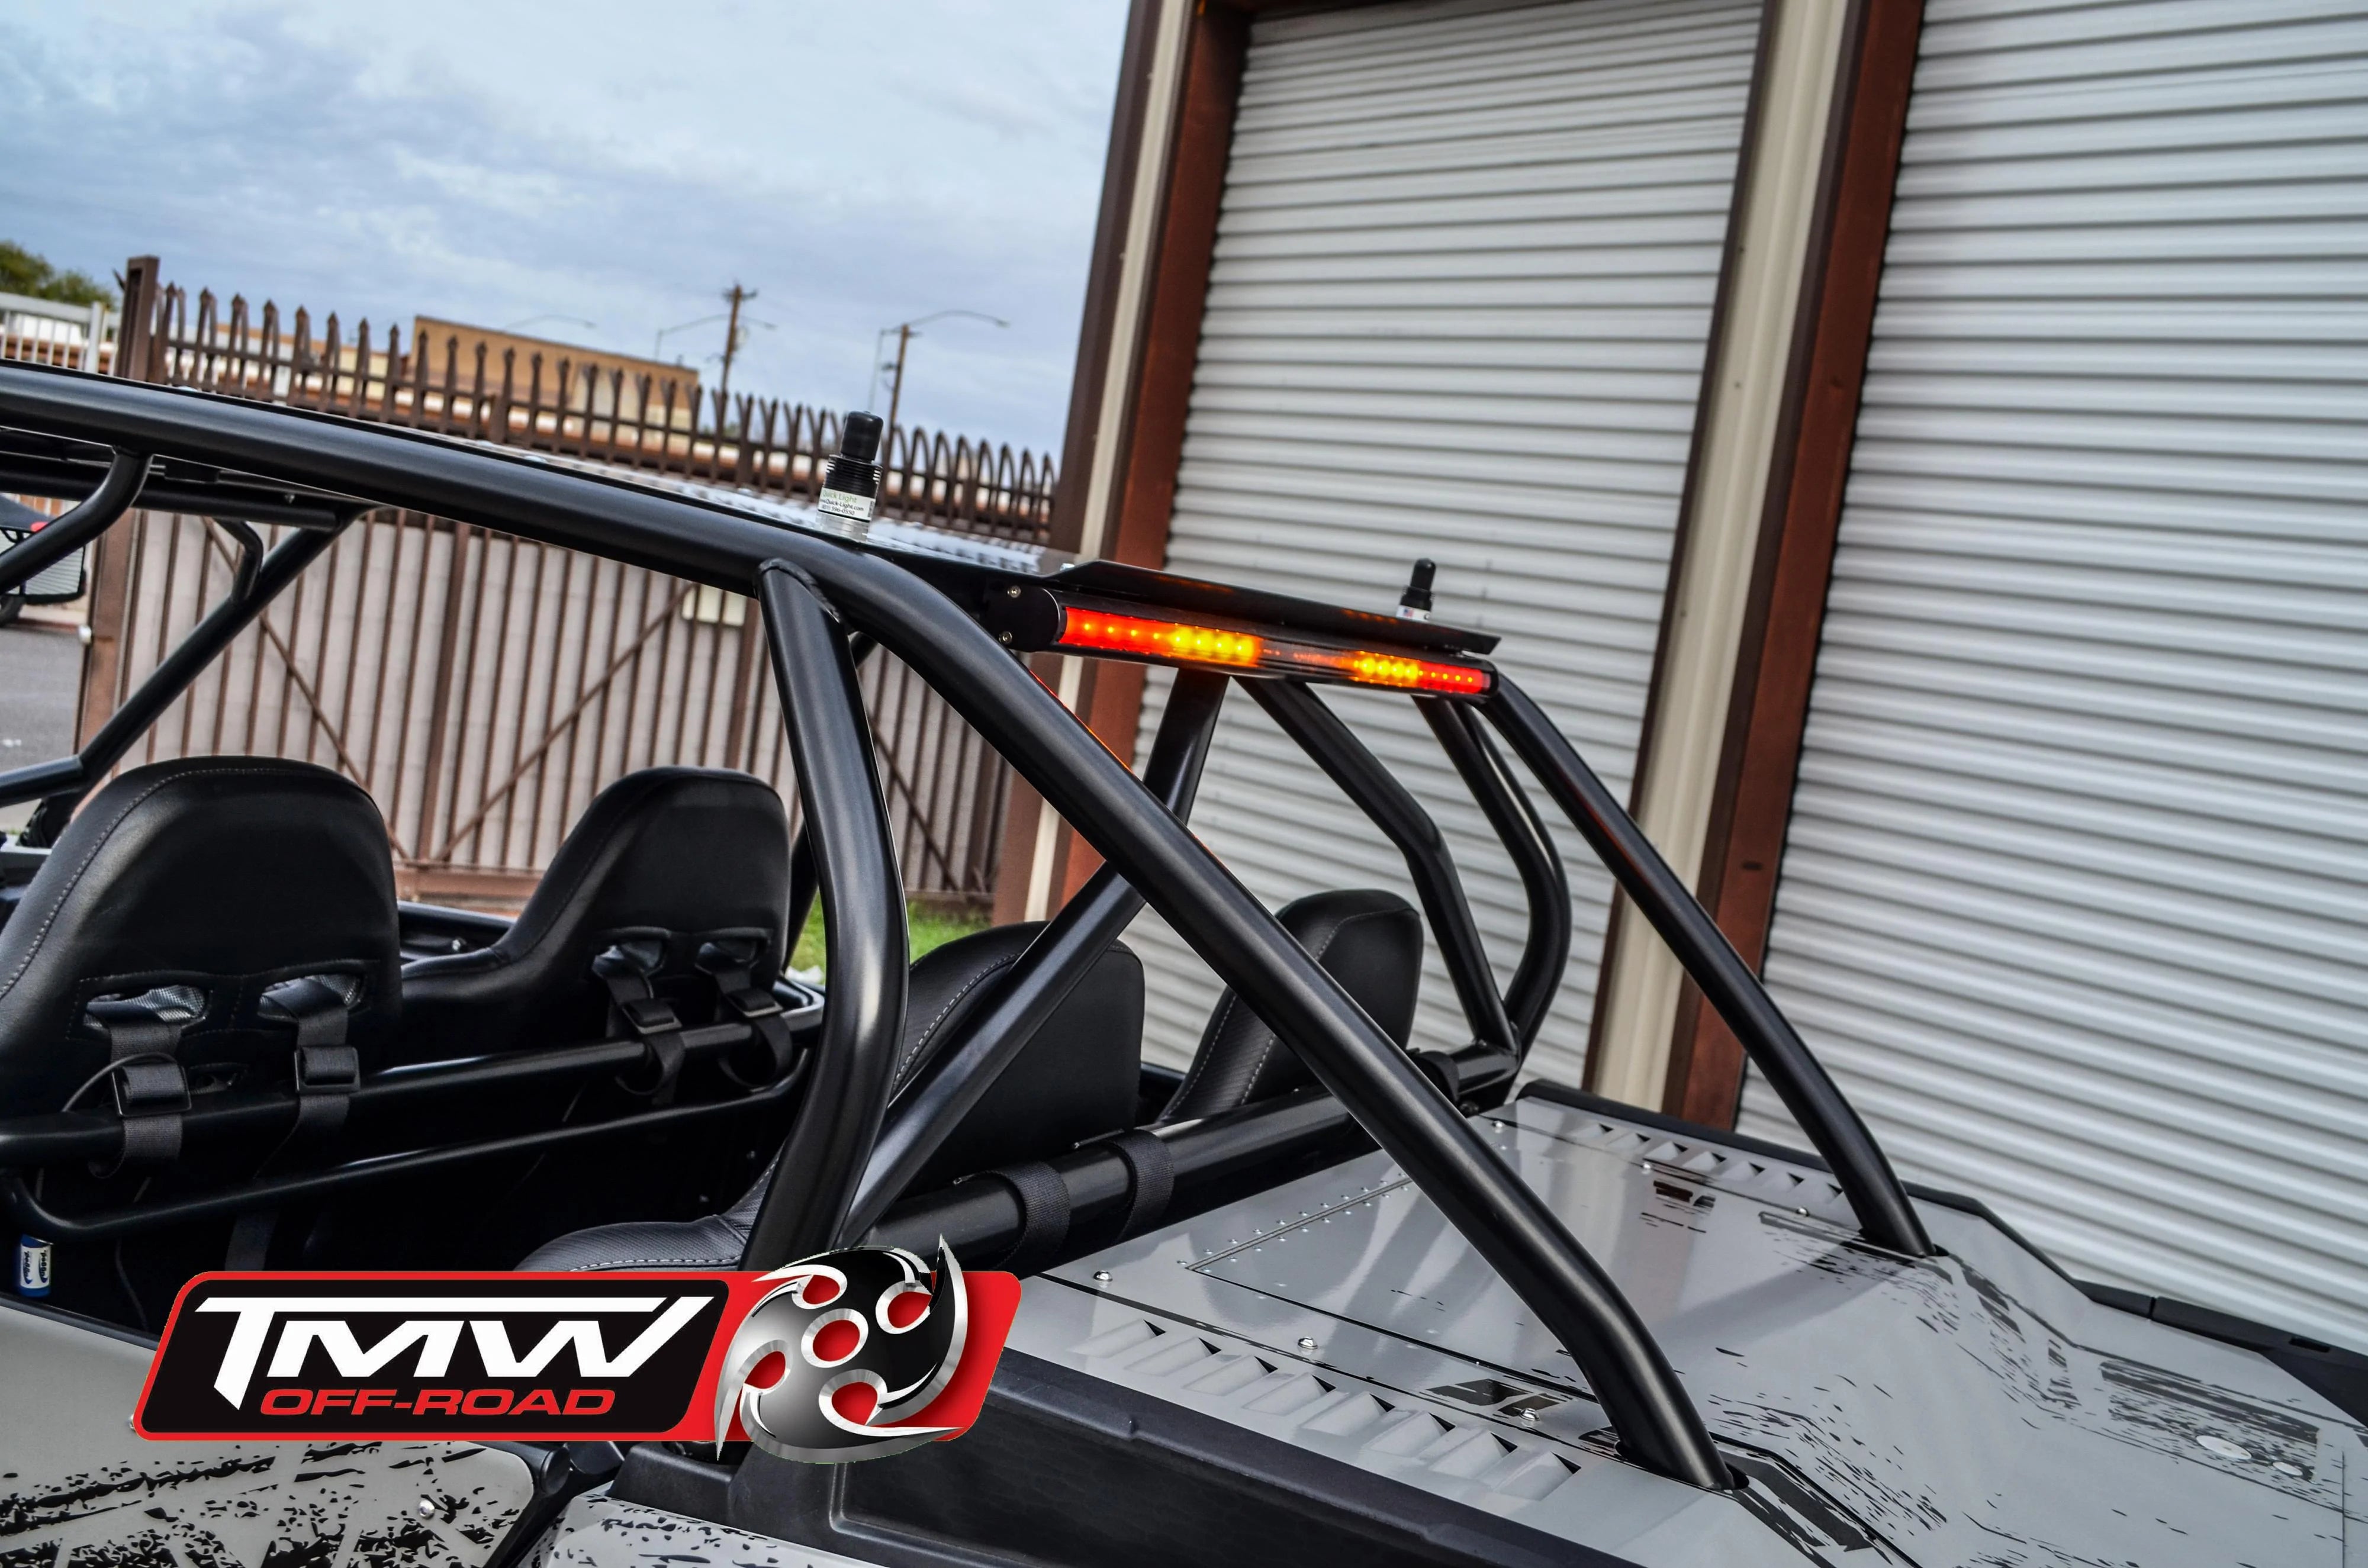 XP4 Dune edition speed cage (fits 2018 and older RZR 1000 models) - G Life UTV Shop Parts